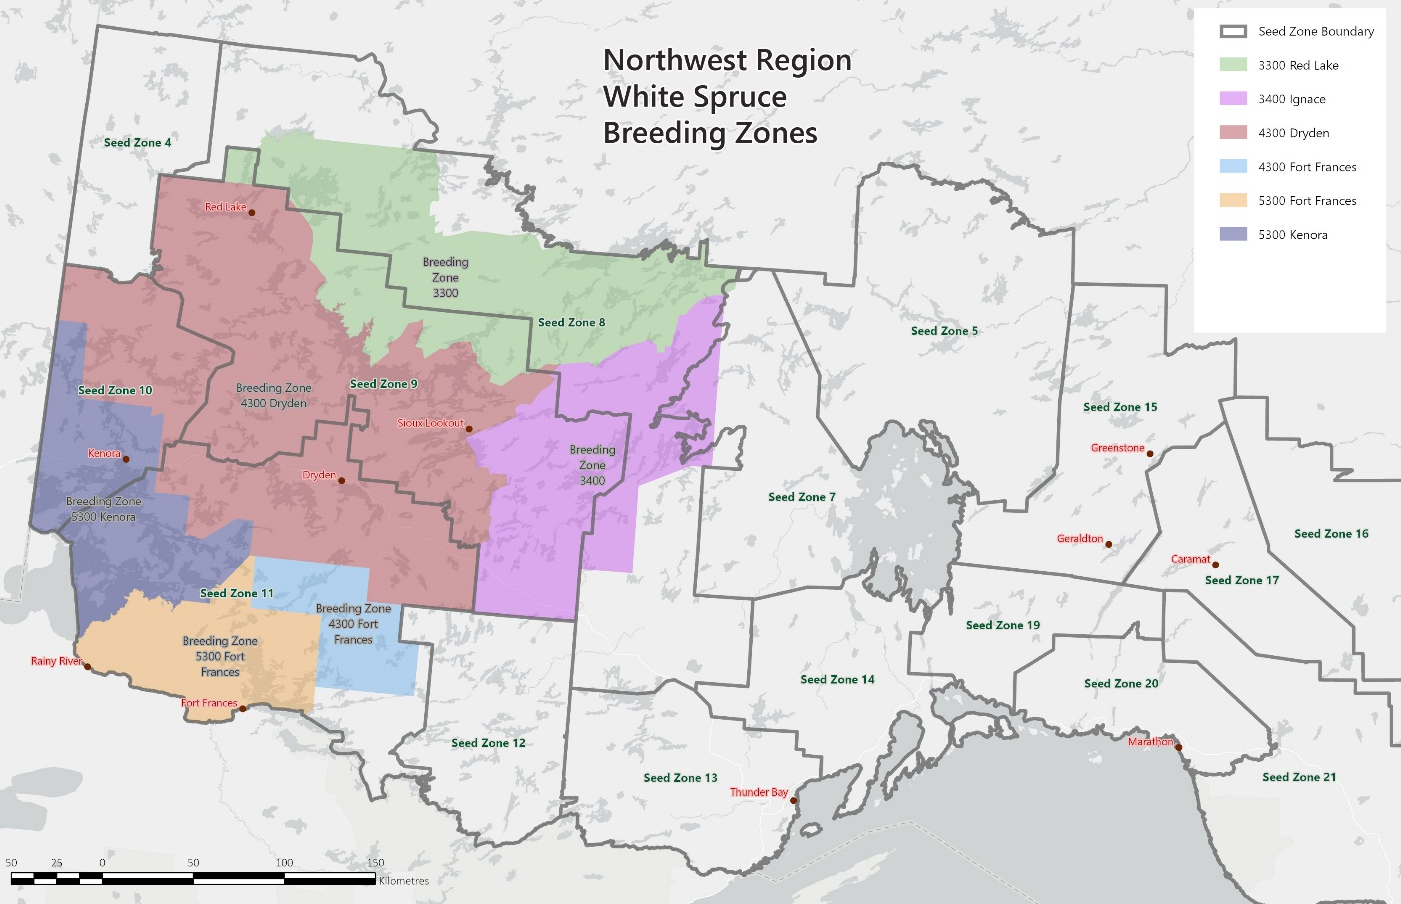 A map of the seven northwestern Ontario region White Spruce breeding zones shaded on the map with various colours.